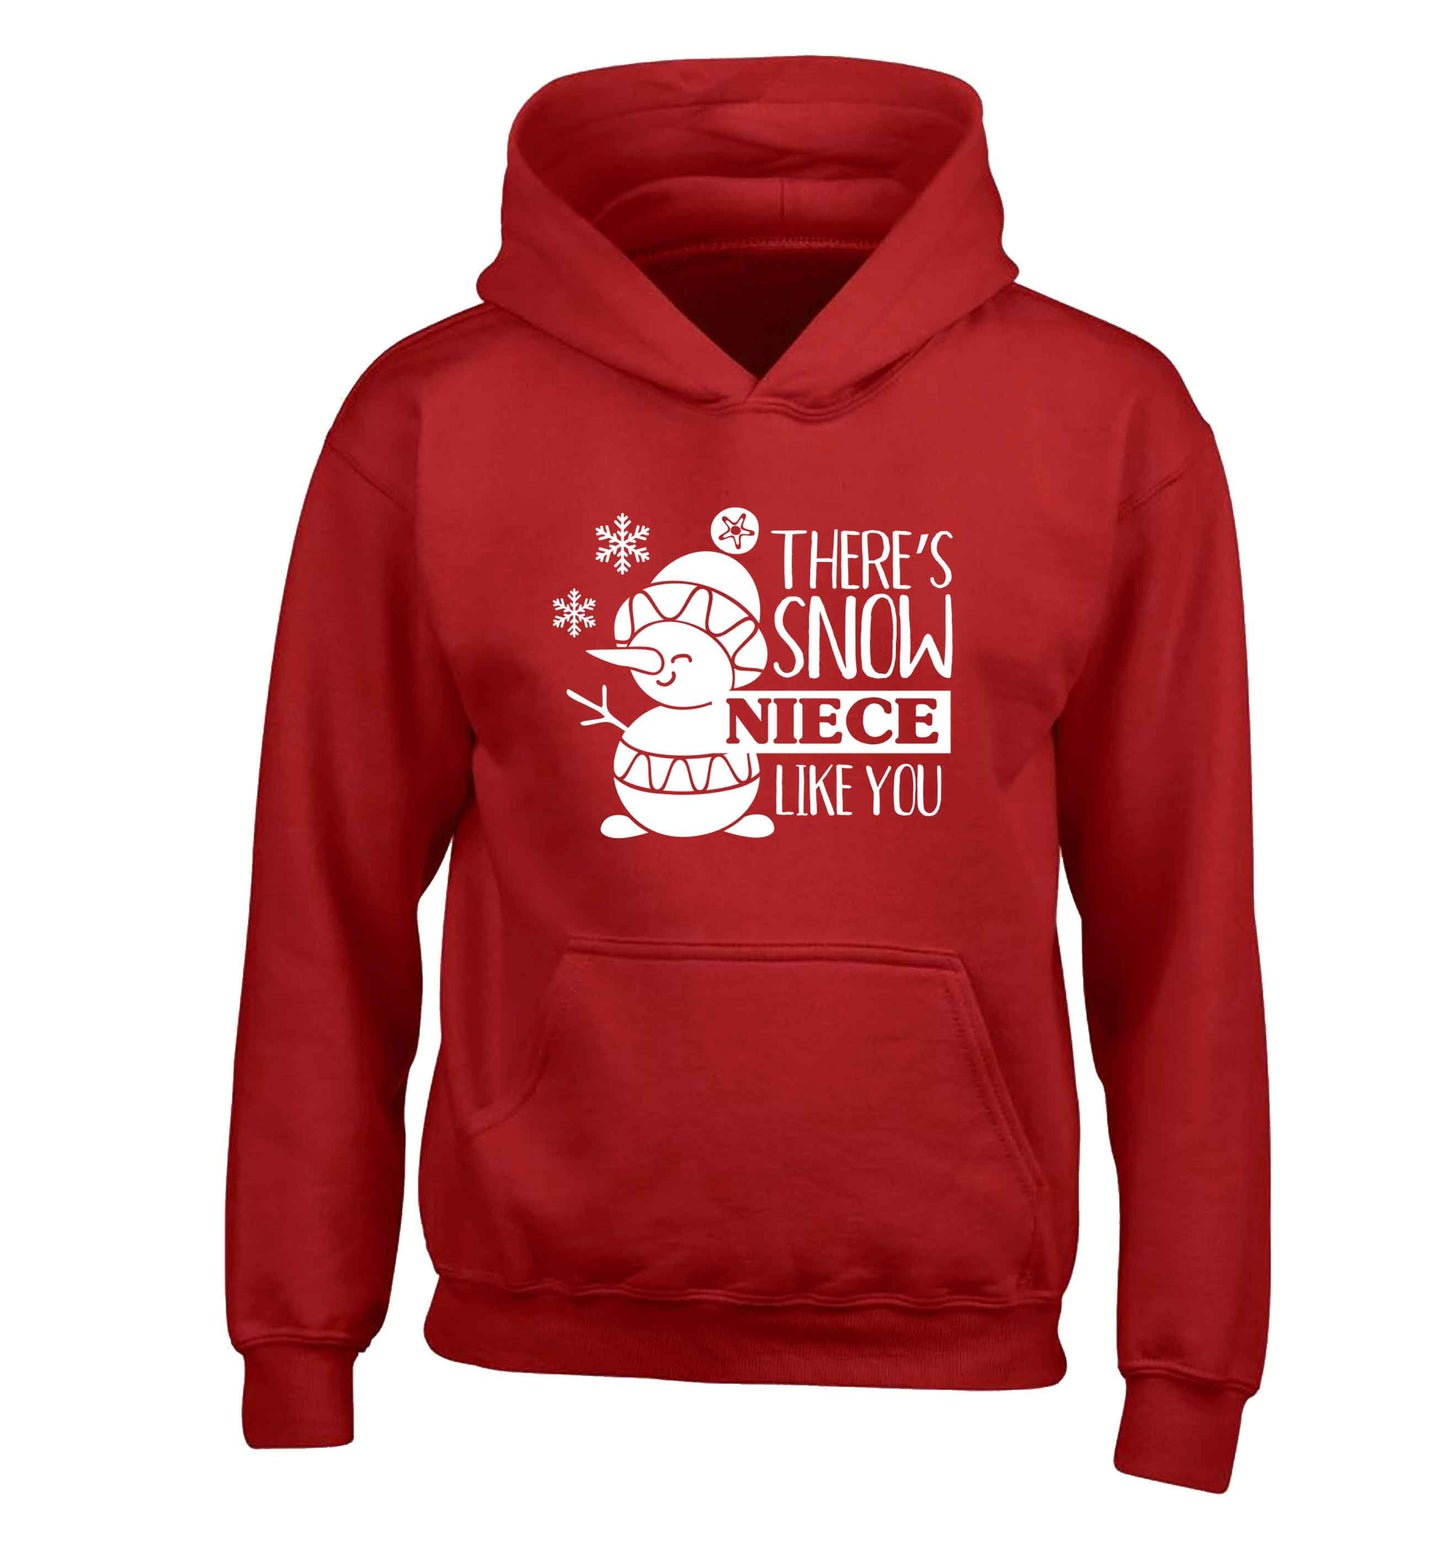 There's snow niece like you children's red hoodie 12-13 Years